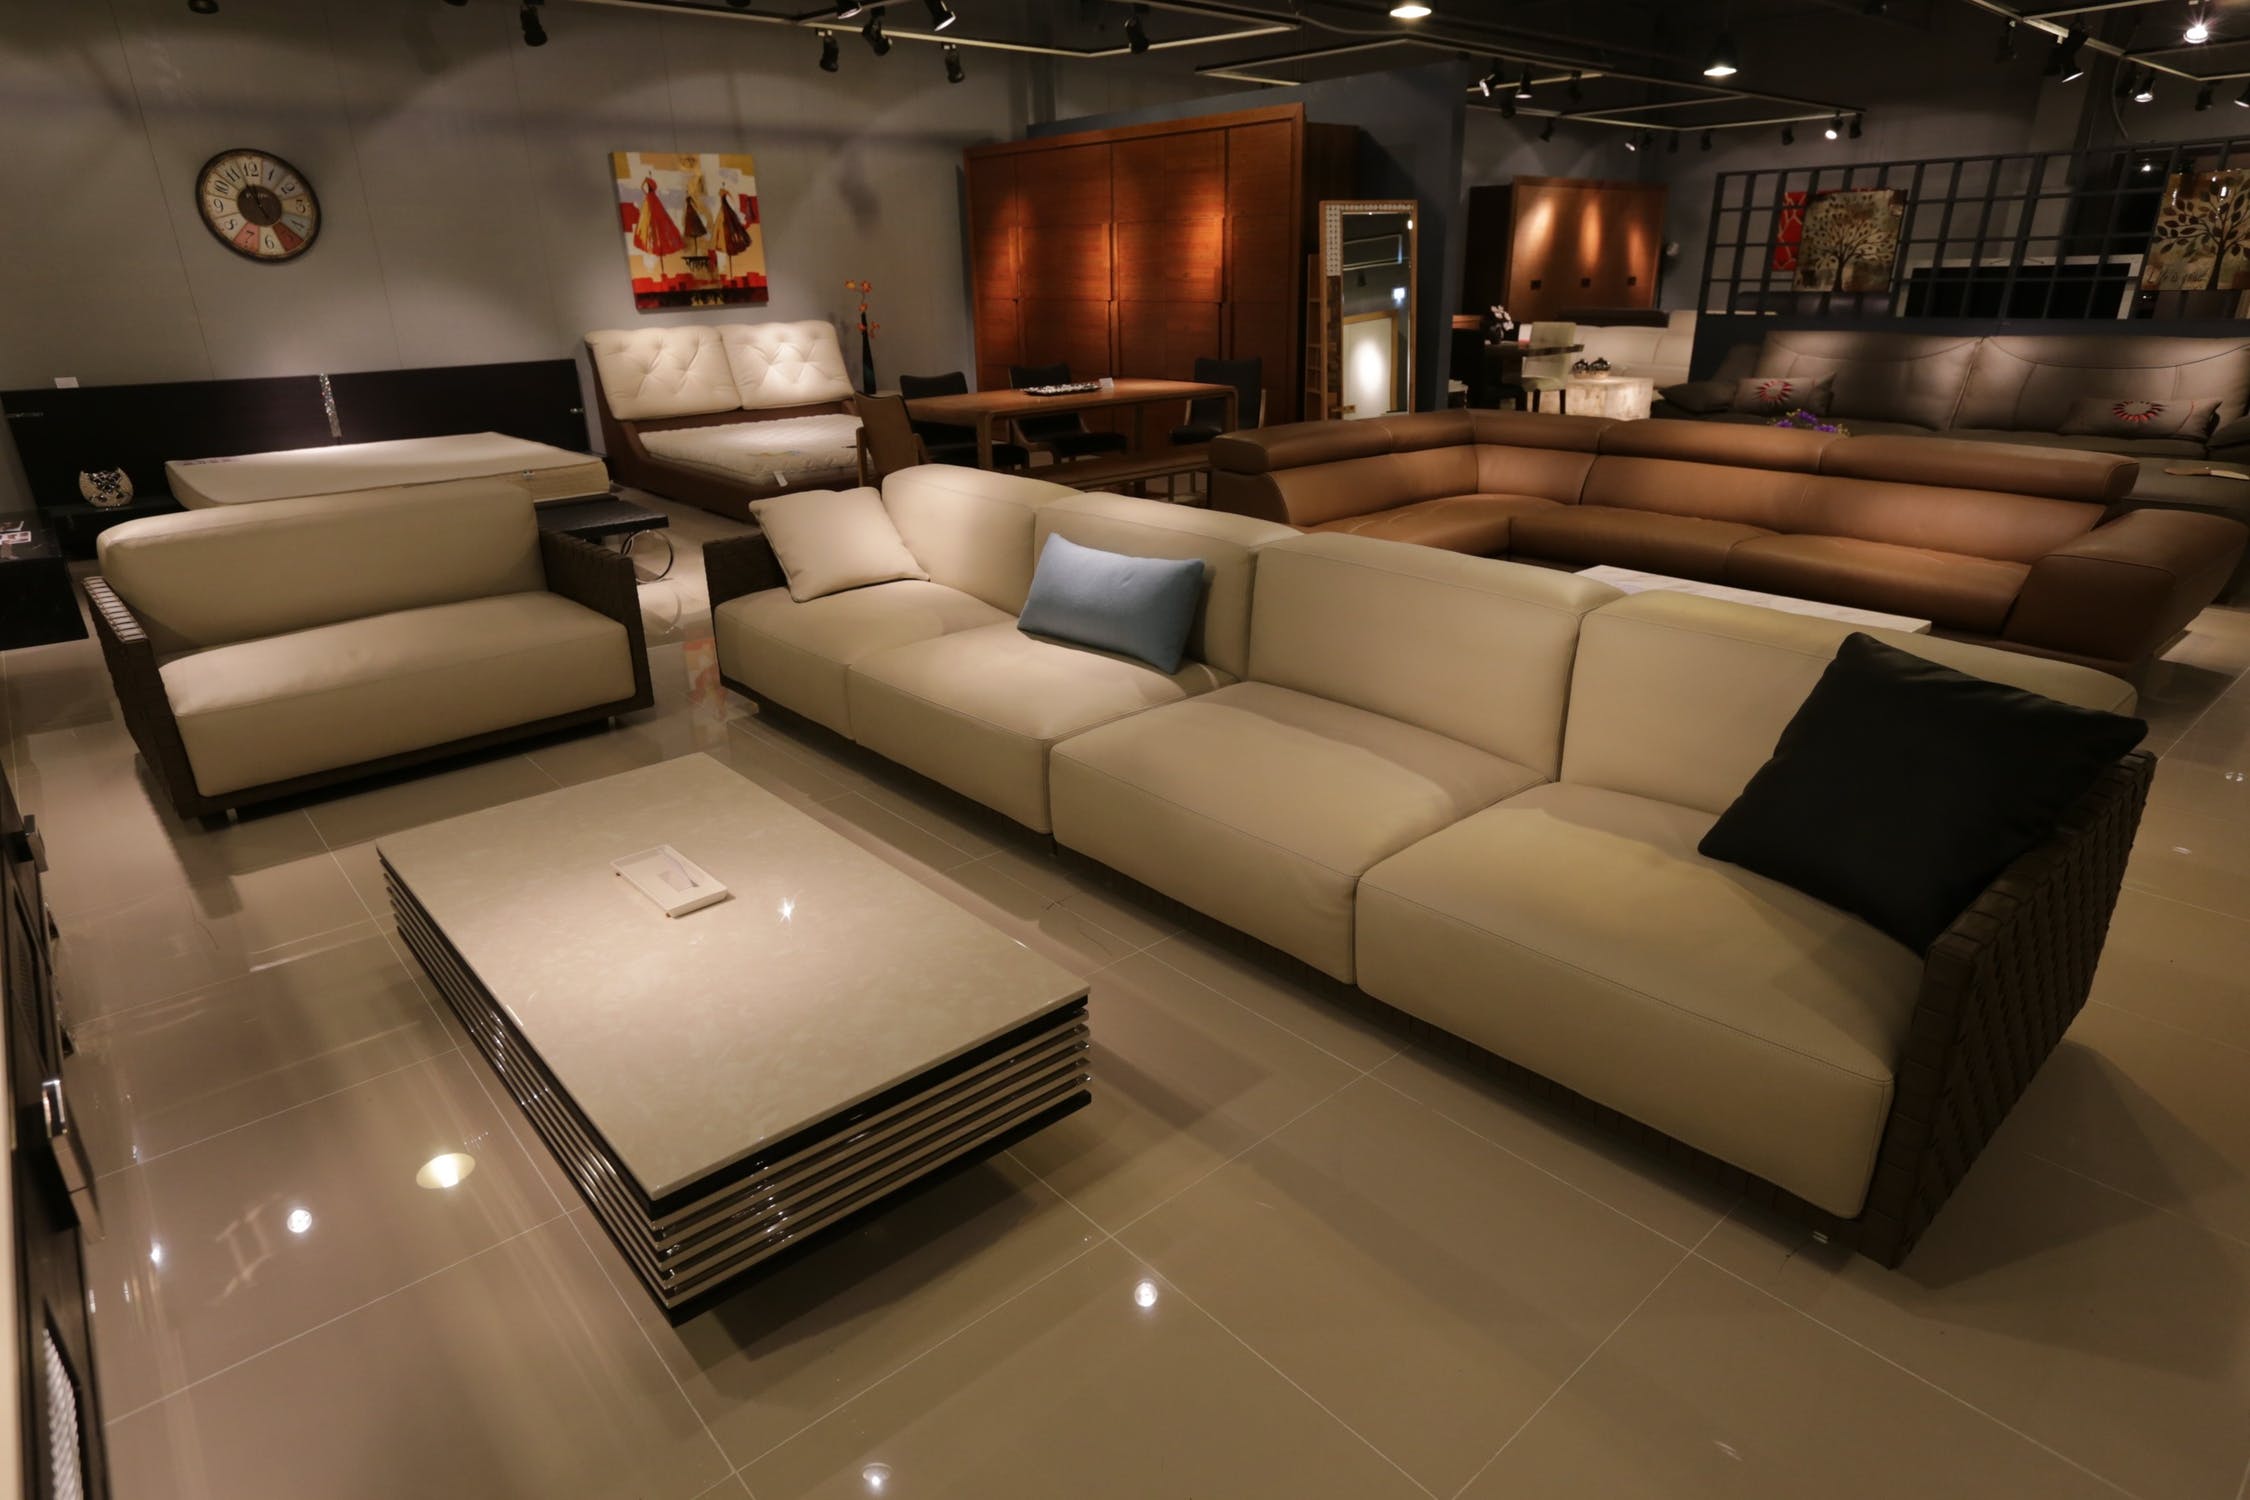 How to Choose the Right Furniture for Your House and Make an Informed Decision When Buying